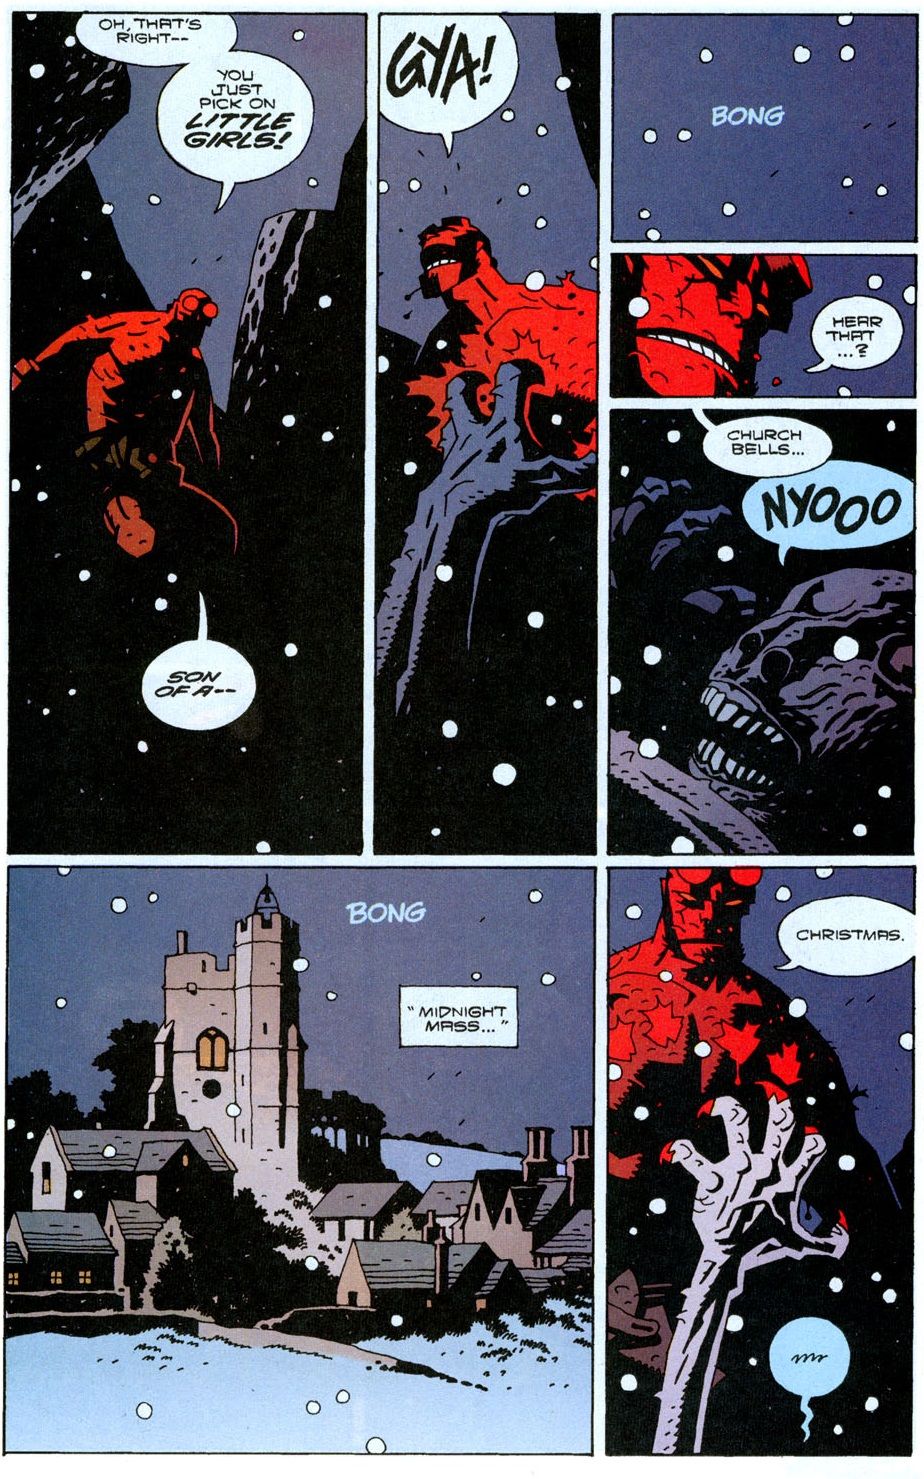 Hellboy is helped by Christmas Eve